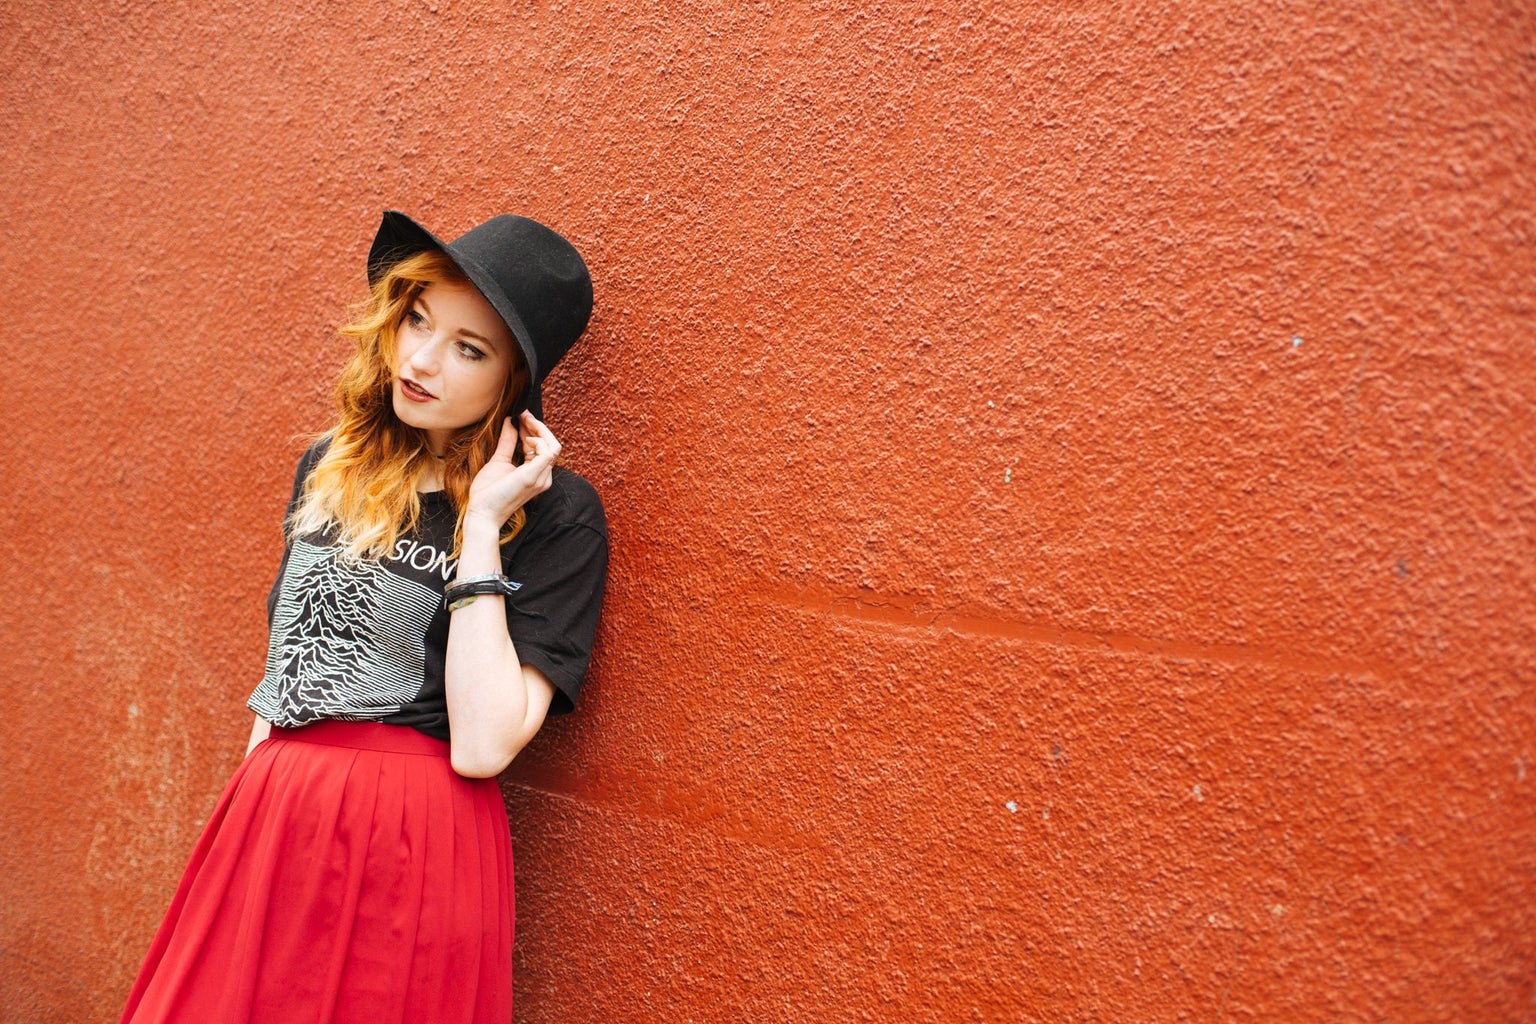 Girl Against Red Wall Red Skirt And Band Tee